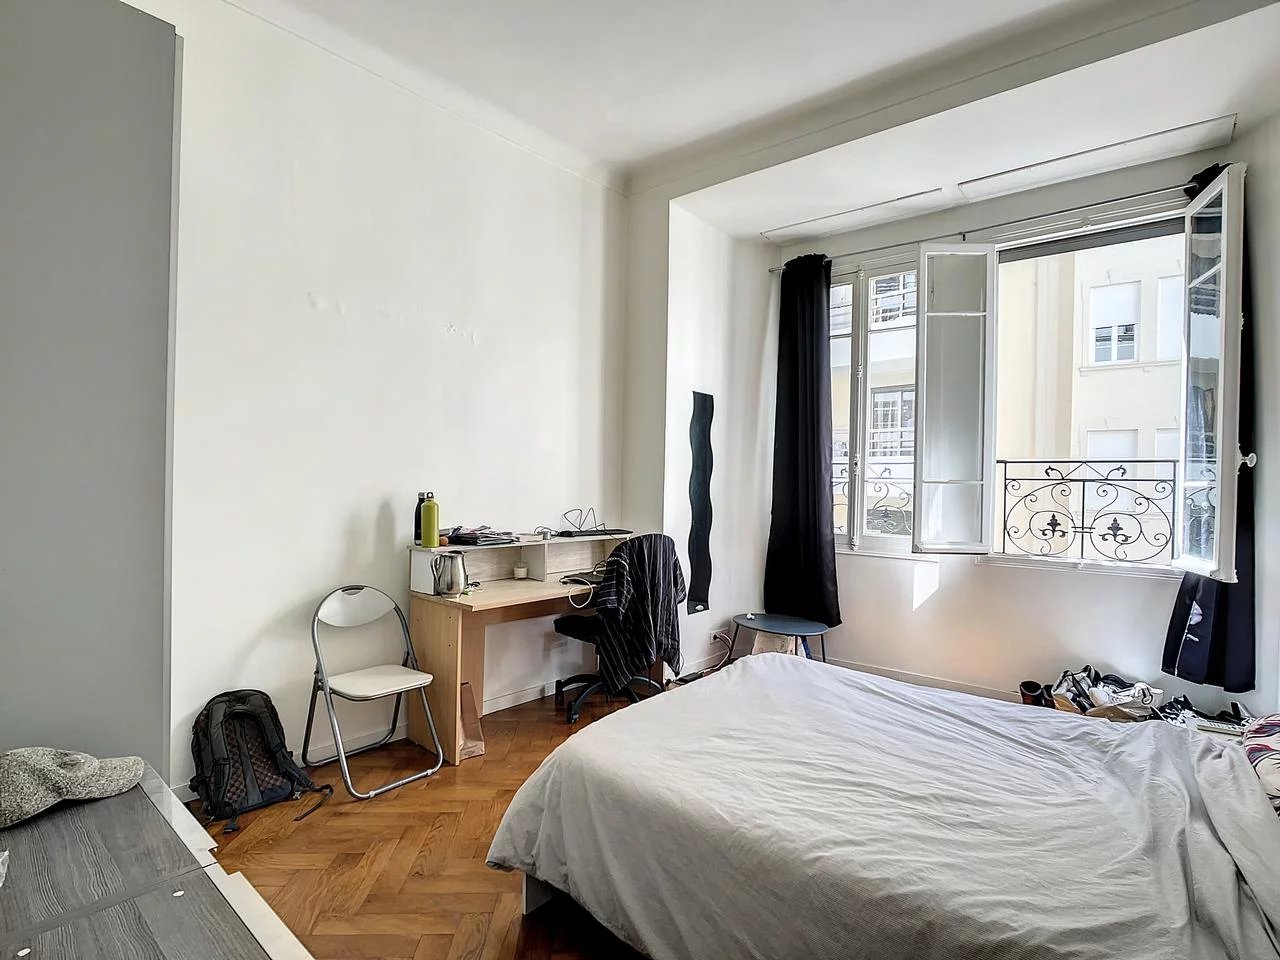 Appartement  6 Rooms 134.6m2  for sale   740 000 €